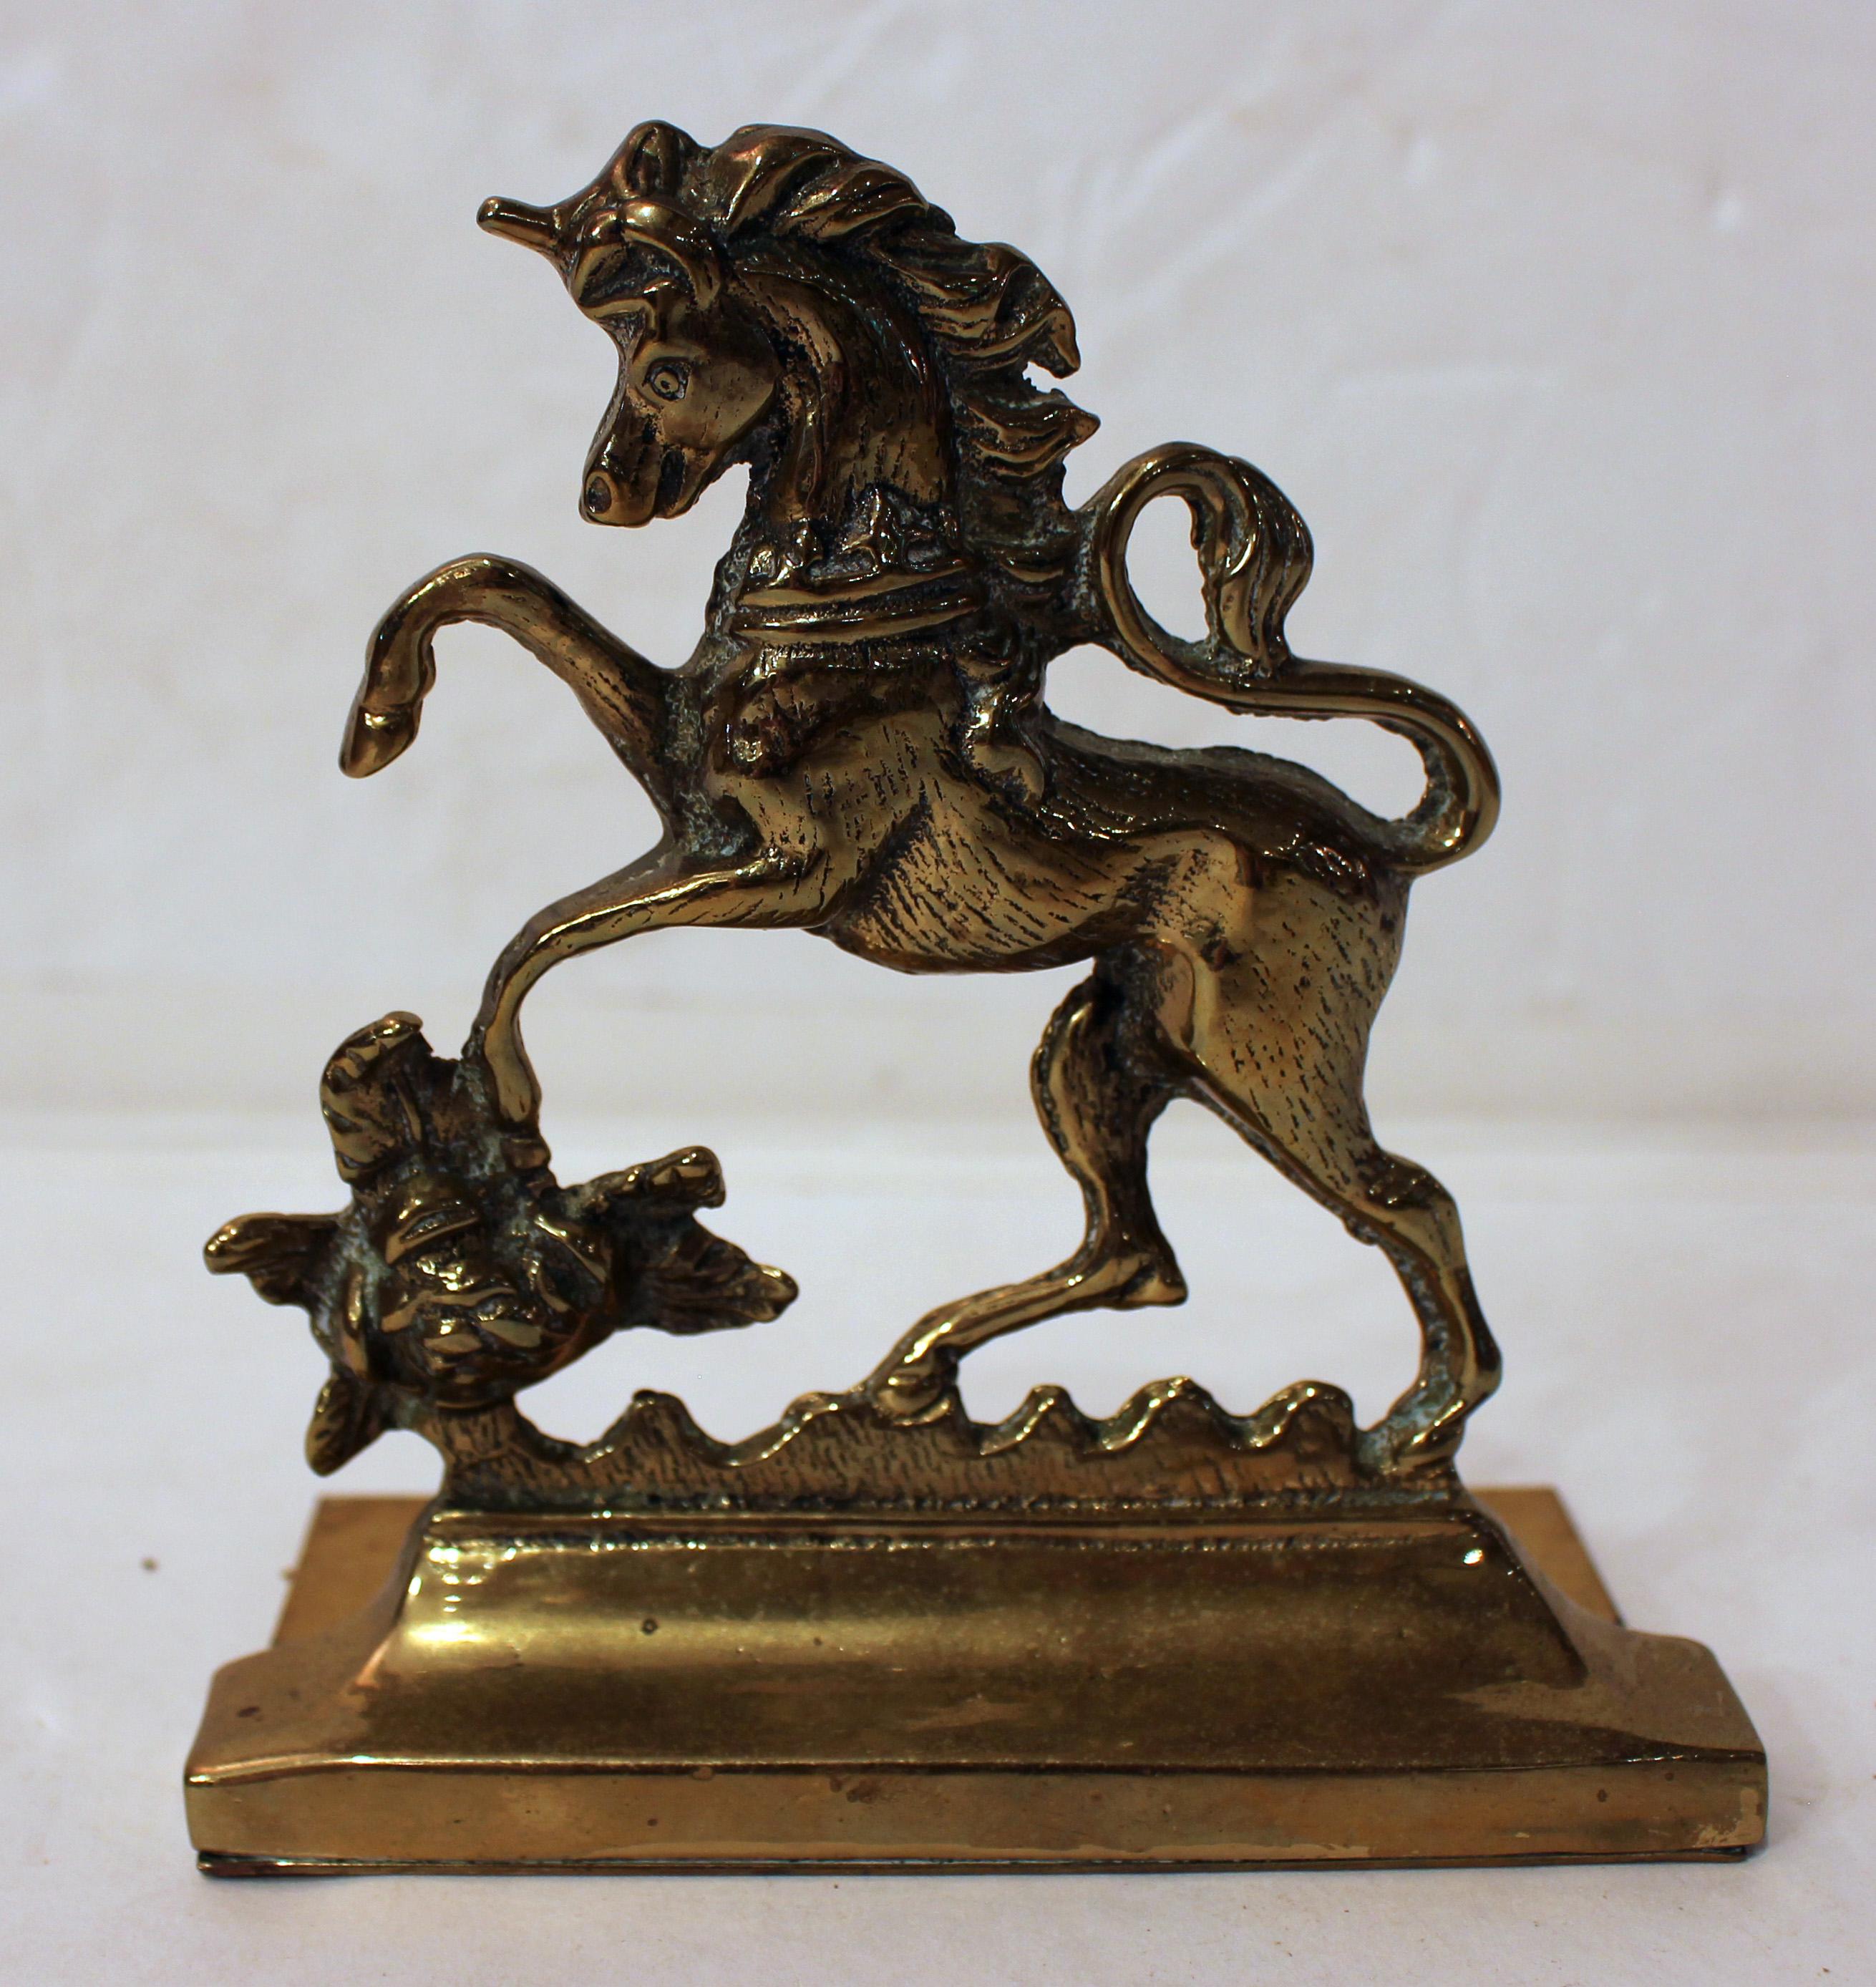 Edwardian period pair of brass bookends, English. Featuring the lion & unicorn, the supporters of the English Royal Crest. Provenance: Estate of Katharine Reid, former director Cleveland Museum of Art.
5 1/2